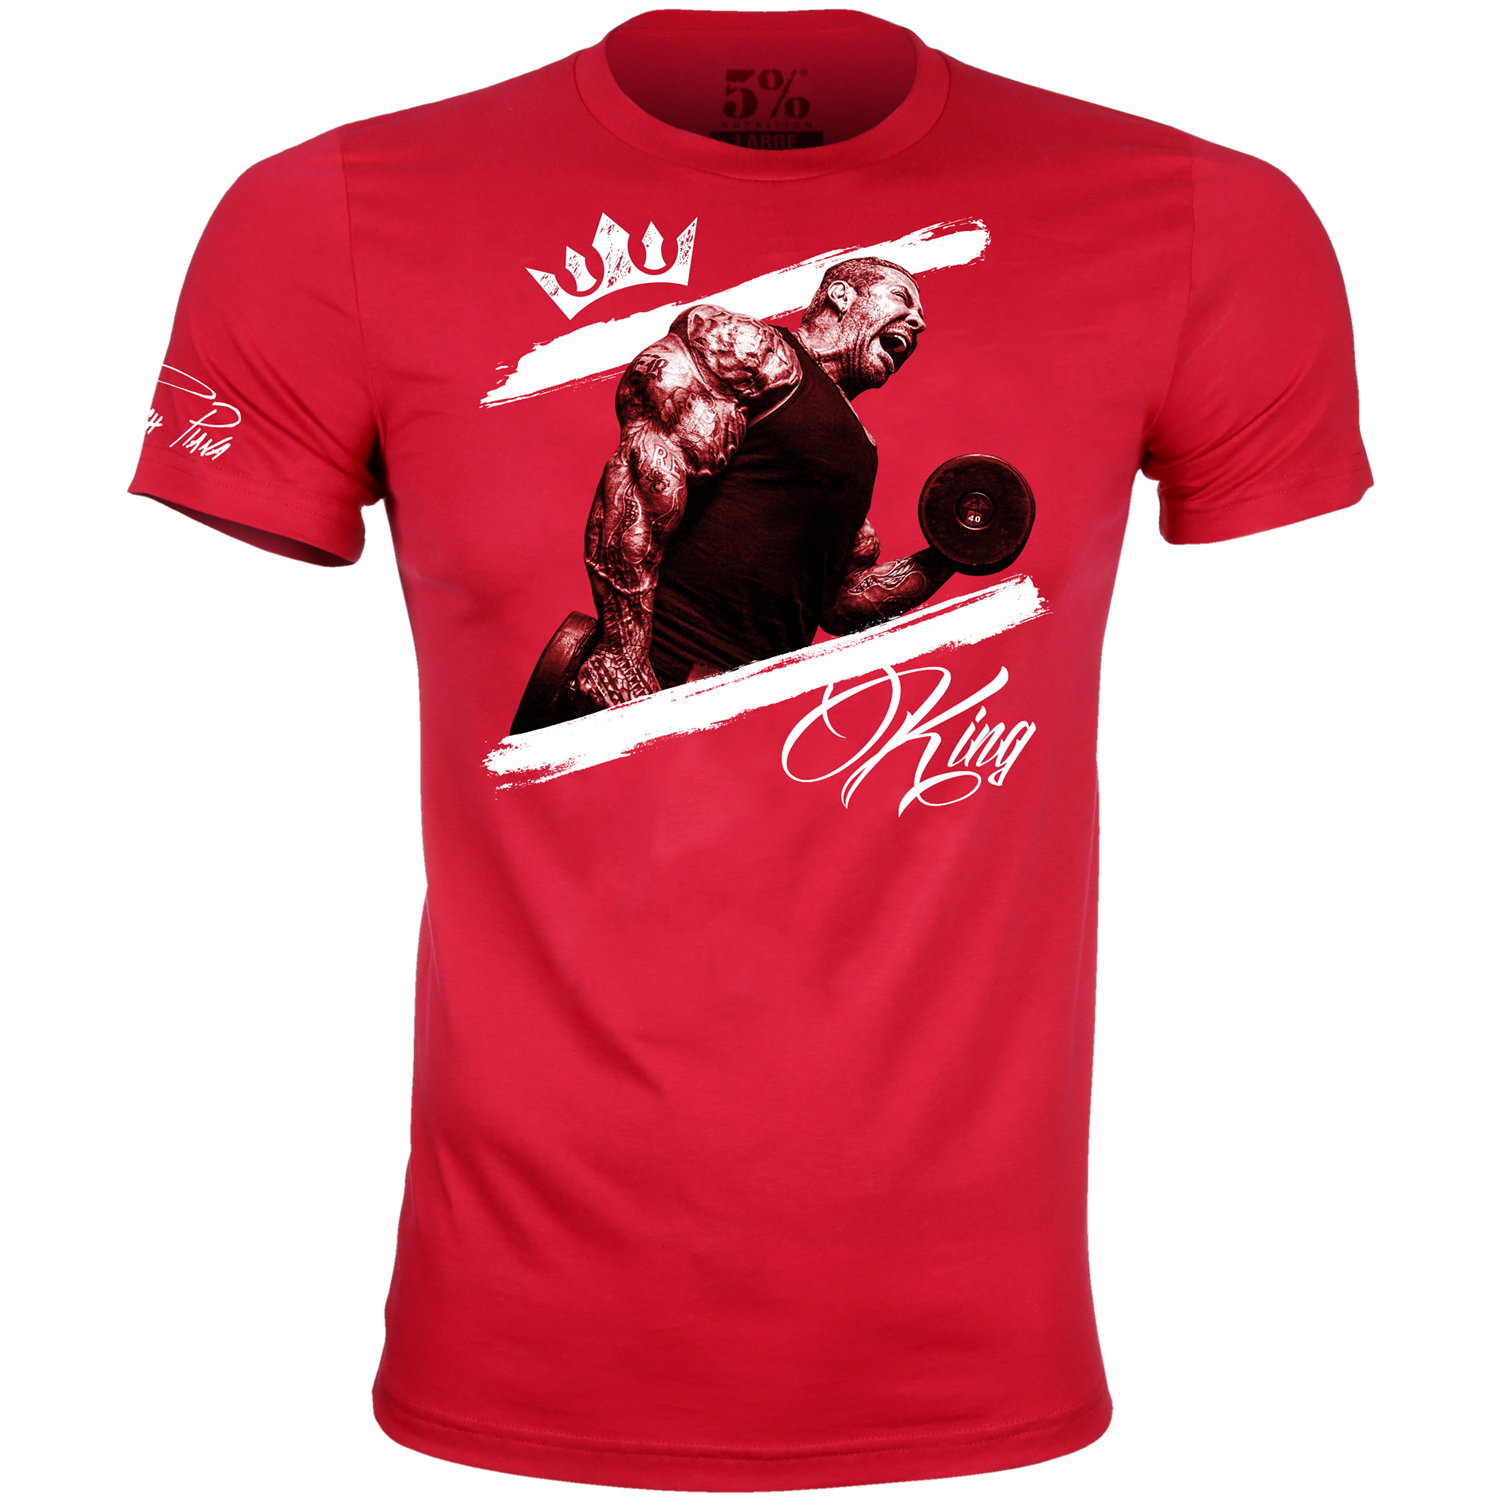 Legendary Kit: Blackout Edition Red T-Shirt - 5% Nutrition